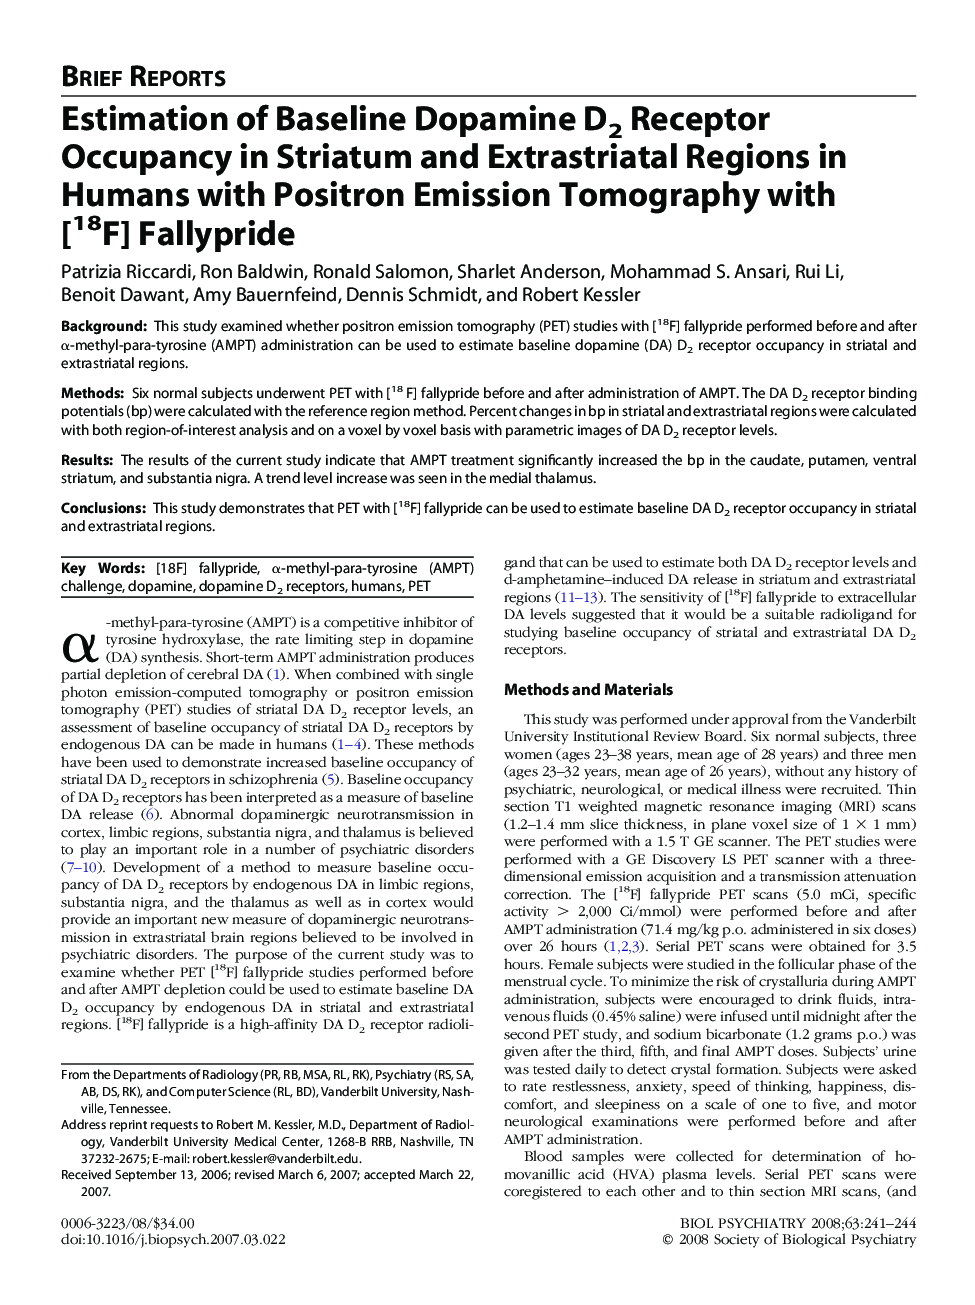 Estimation of Baseline Dopamine D2 Receptor Occupancy in Striatum and Extrastriatal Regions in Humans with Positron Emission Tomography with [18F] Fallypride